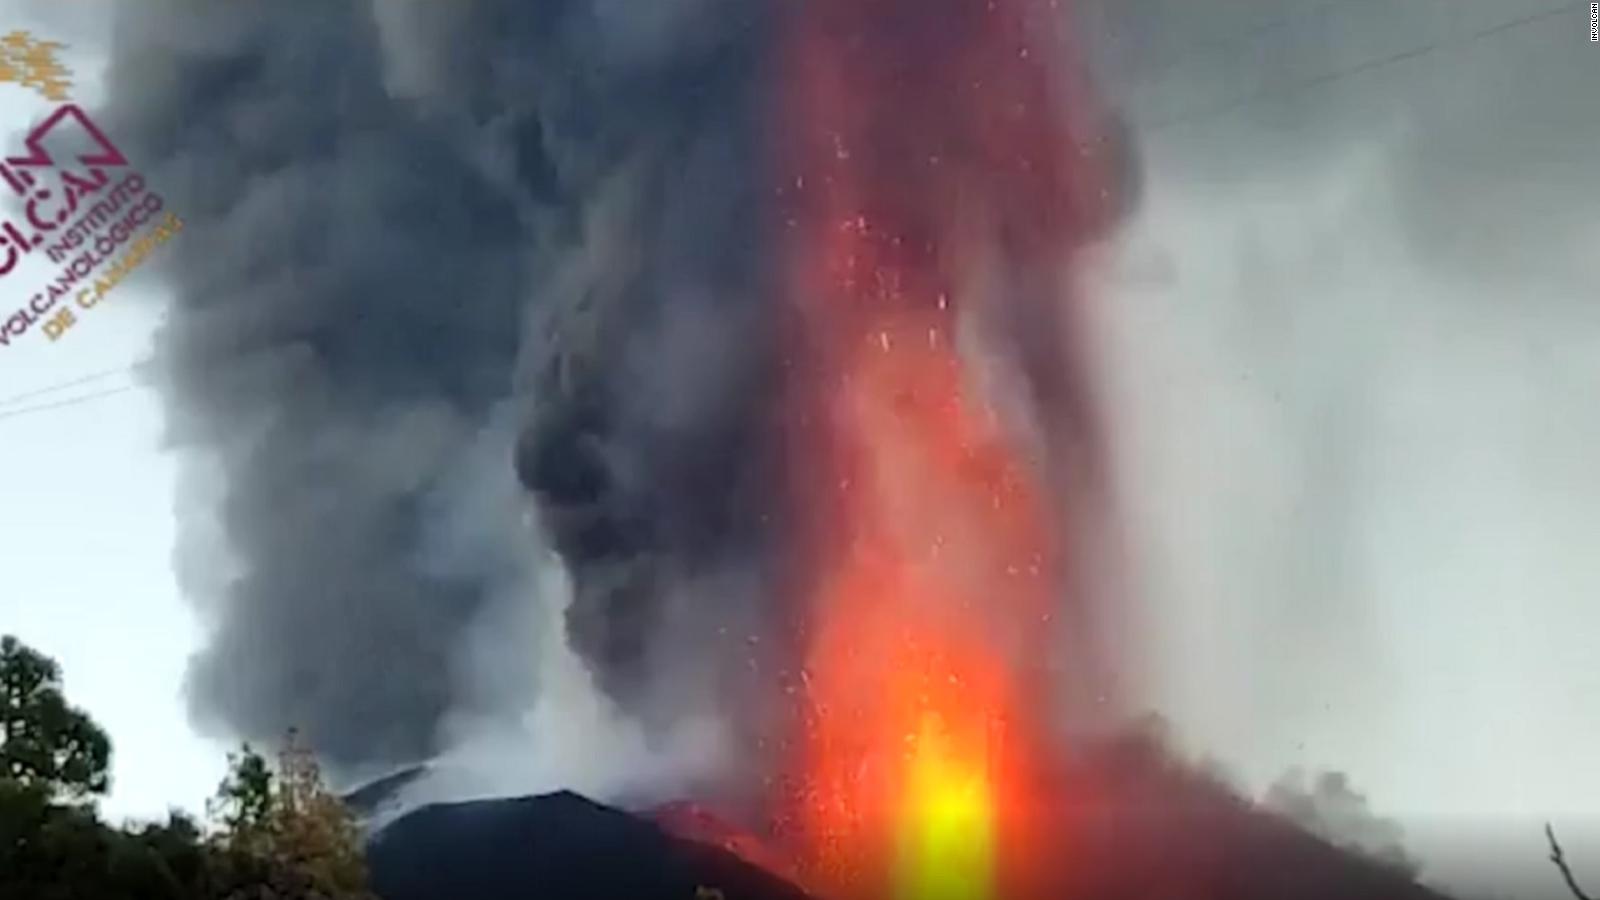 The anger of the La Palma volcano intensified on the 38th